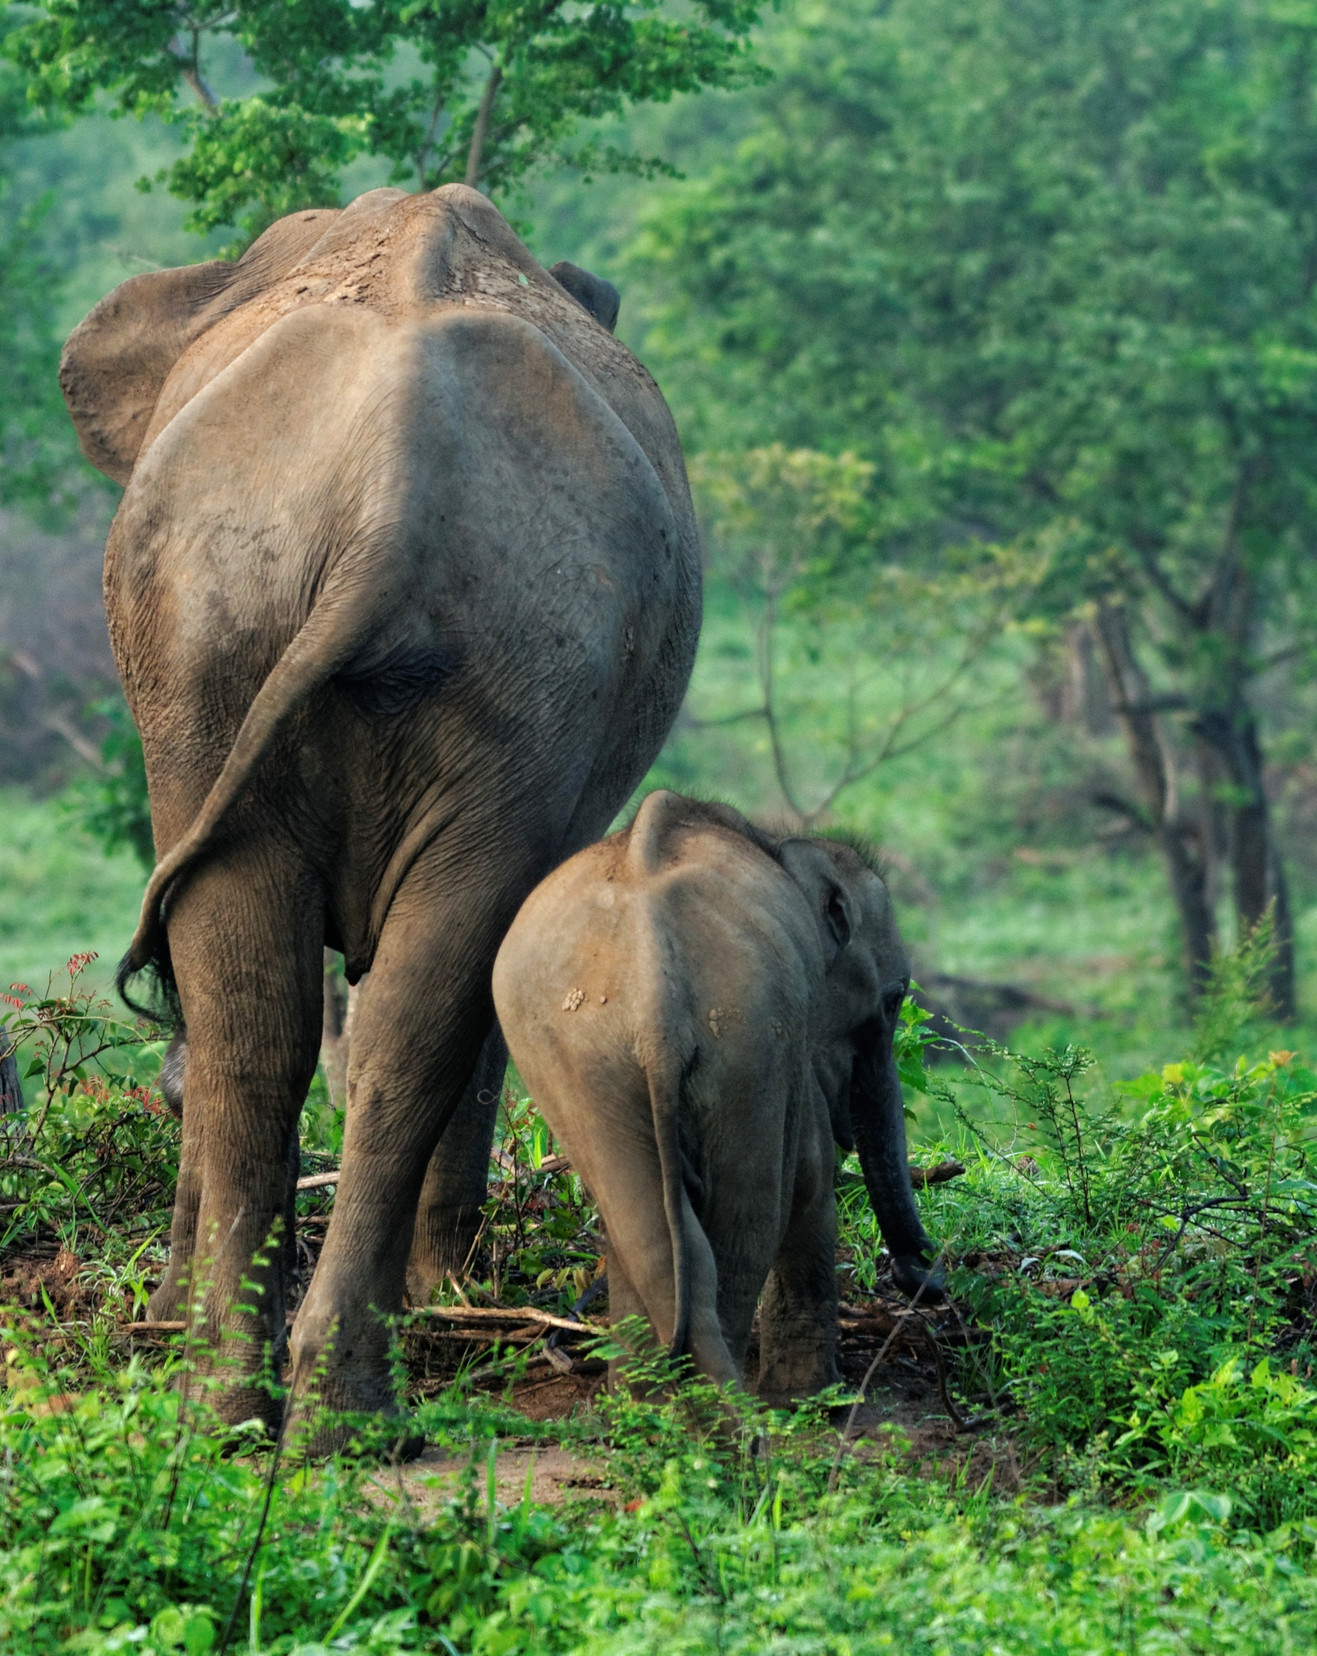 Mother and baby elephants in the wild